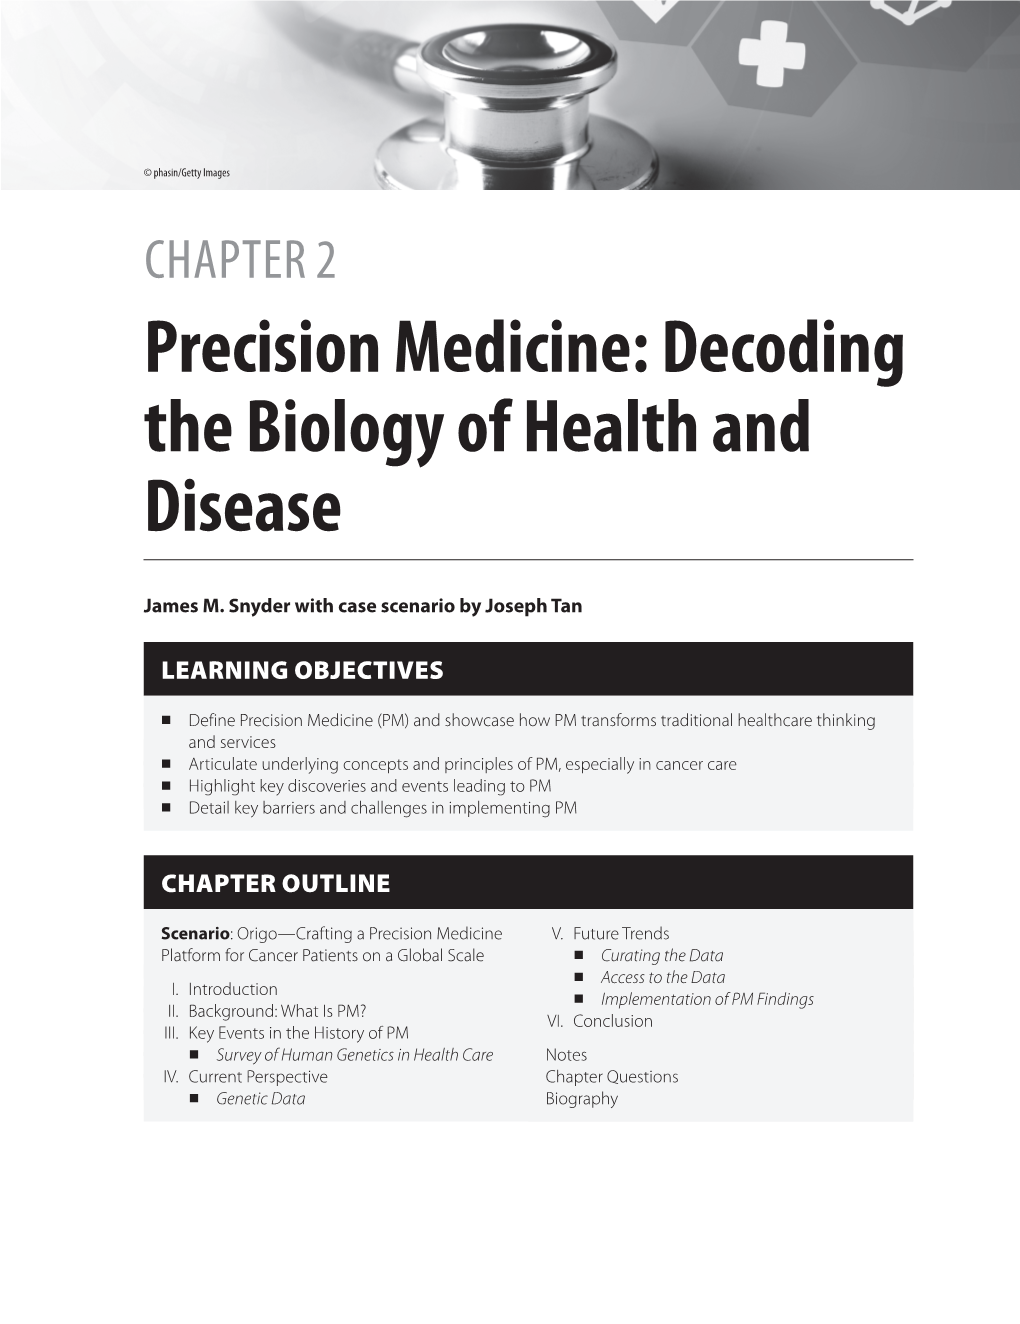 Precision Medicine: Decoding the Biology of Health and Disease